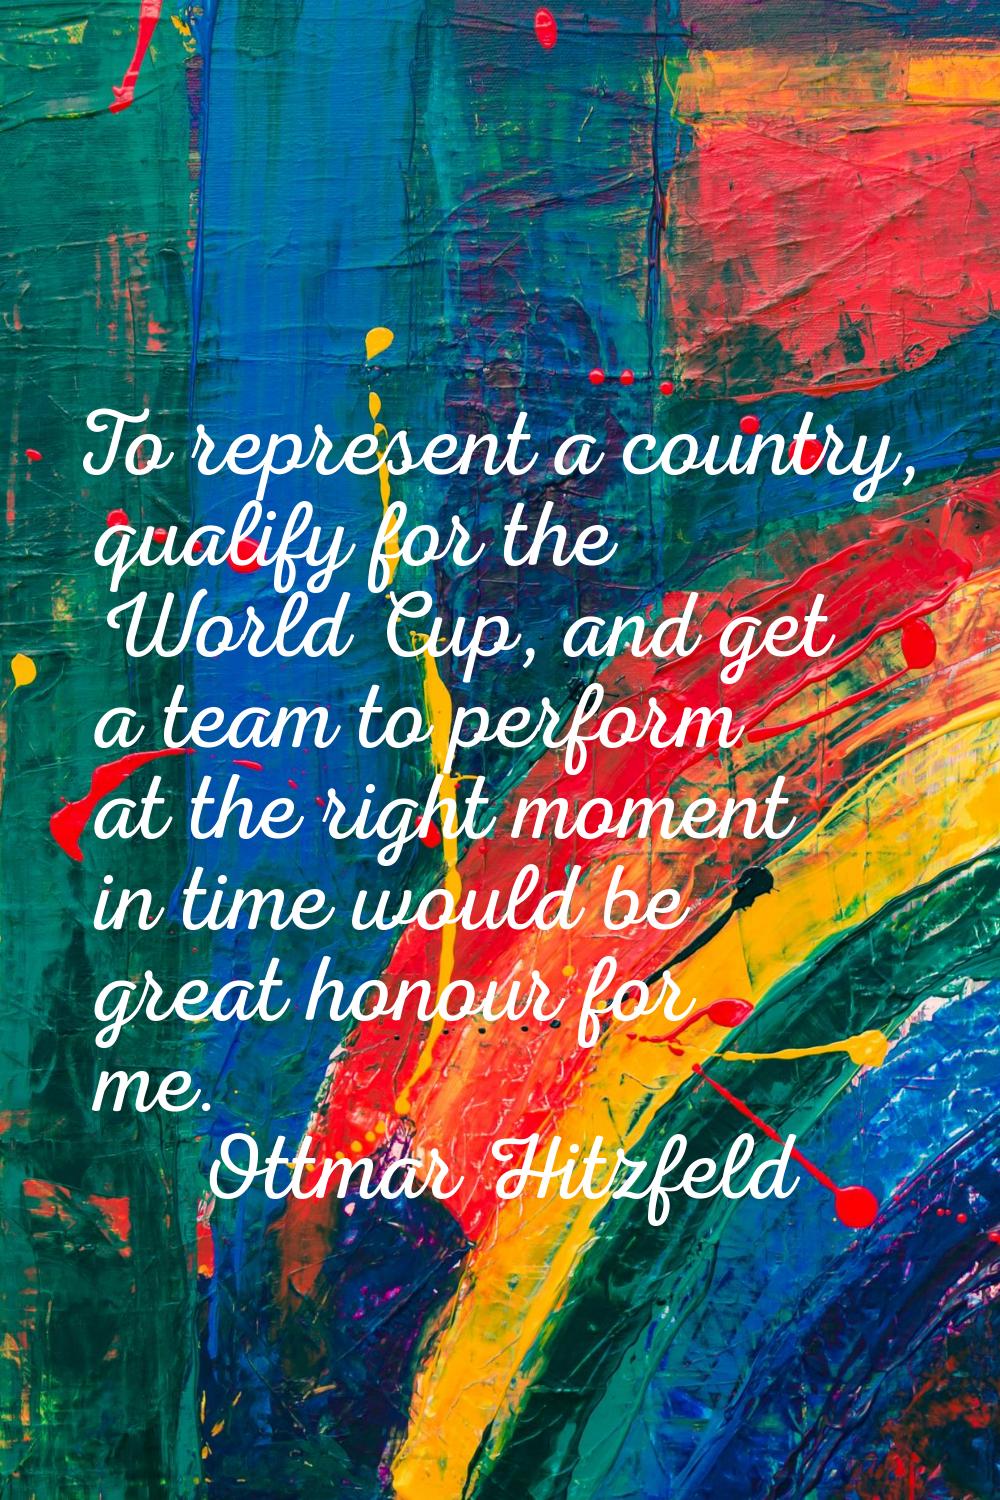 To represent a country, qualify for the World Cup, and get a team to perform at the right moment in